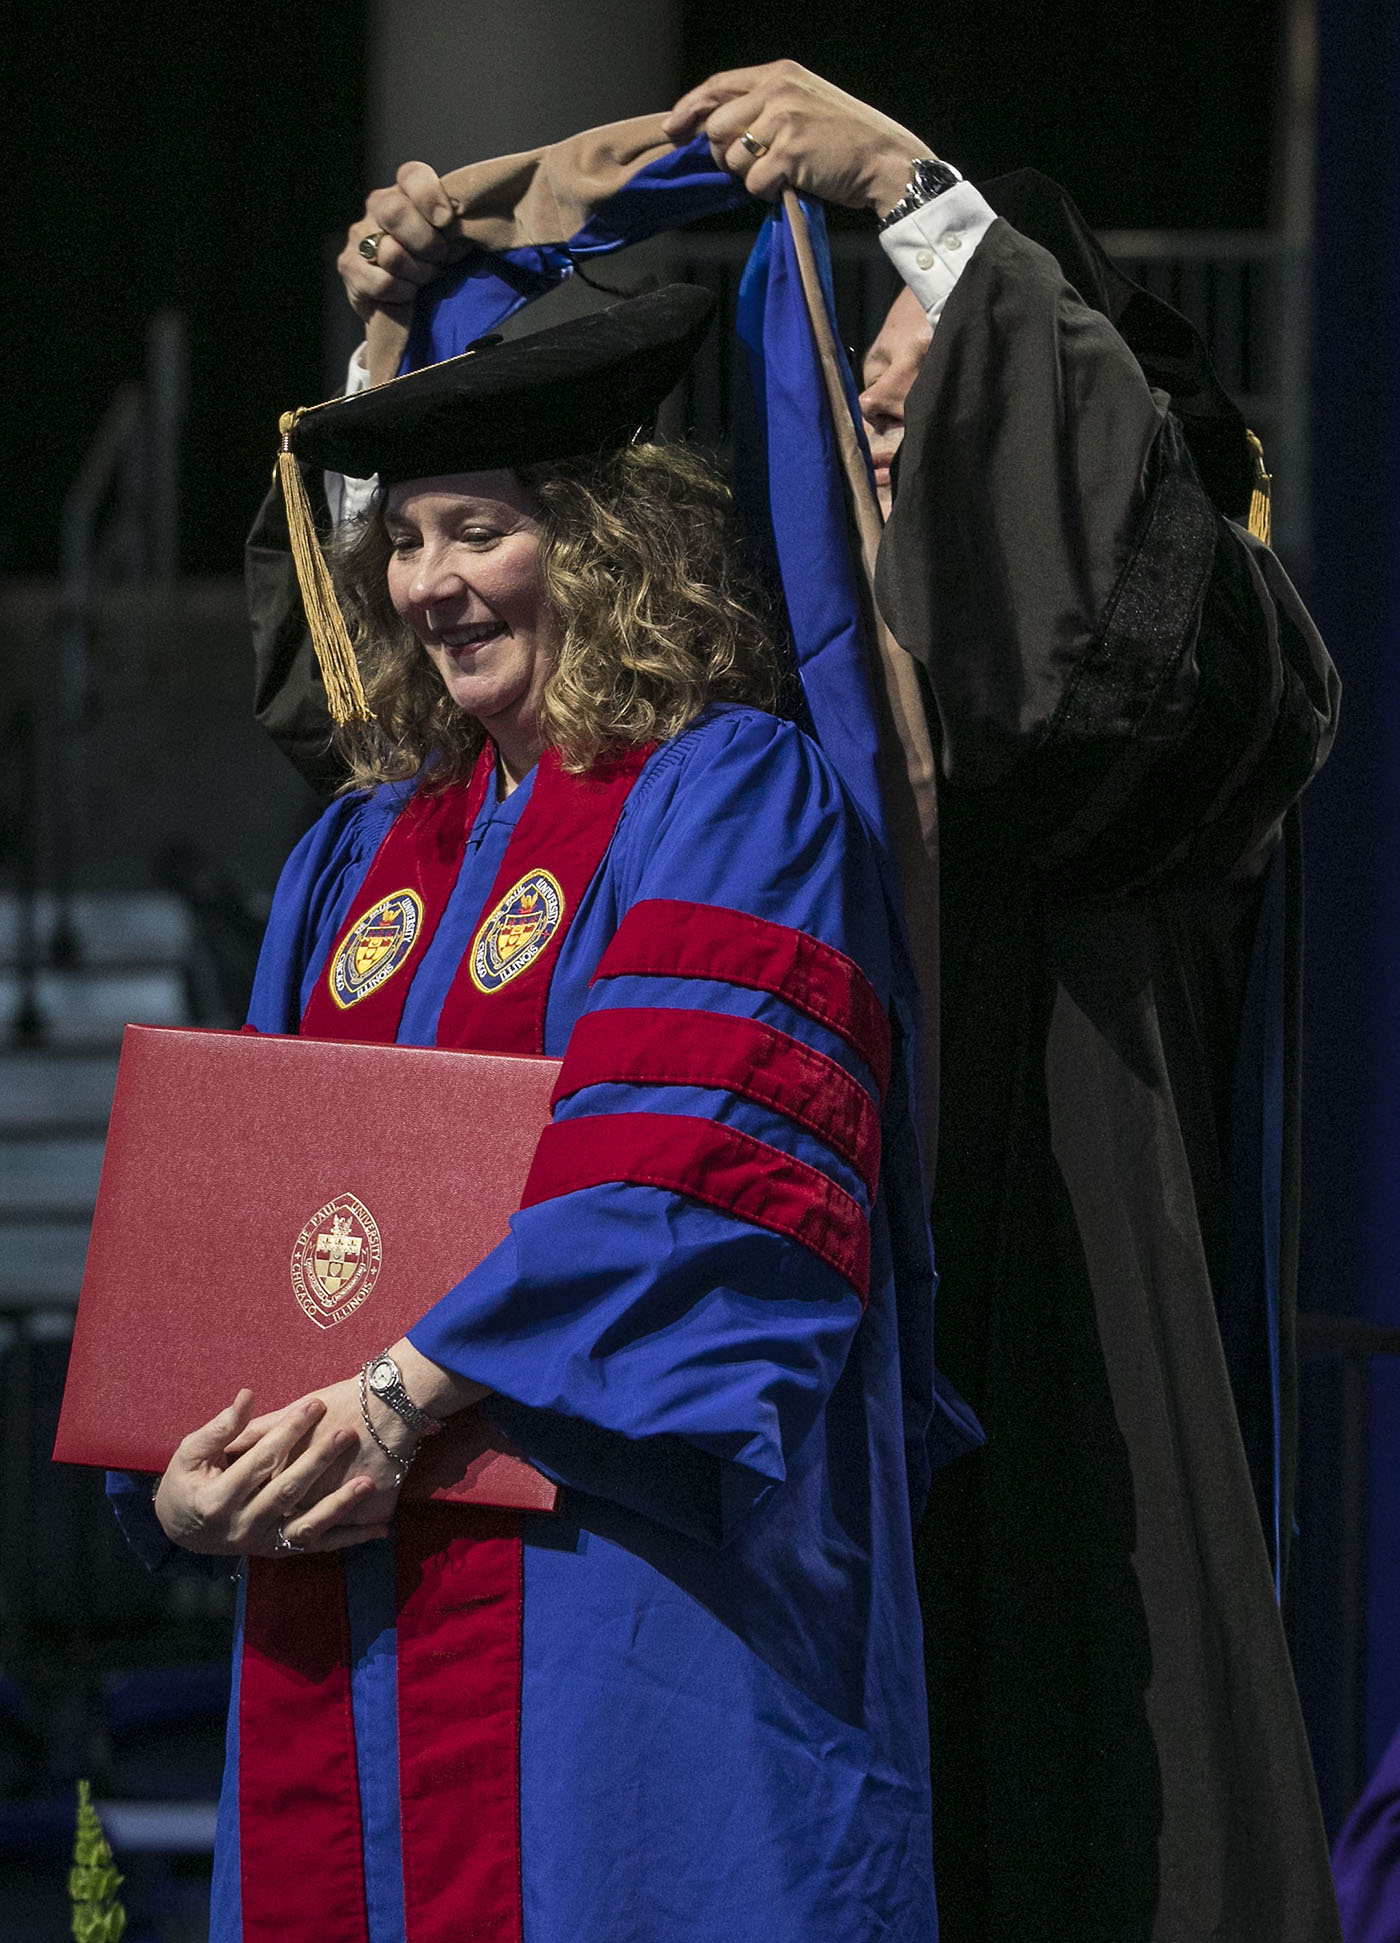 Driehaus College of Business doctoral graduate Tammy Higgins receives her hood during the DePaul University commencement ceremony